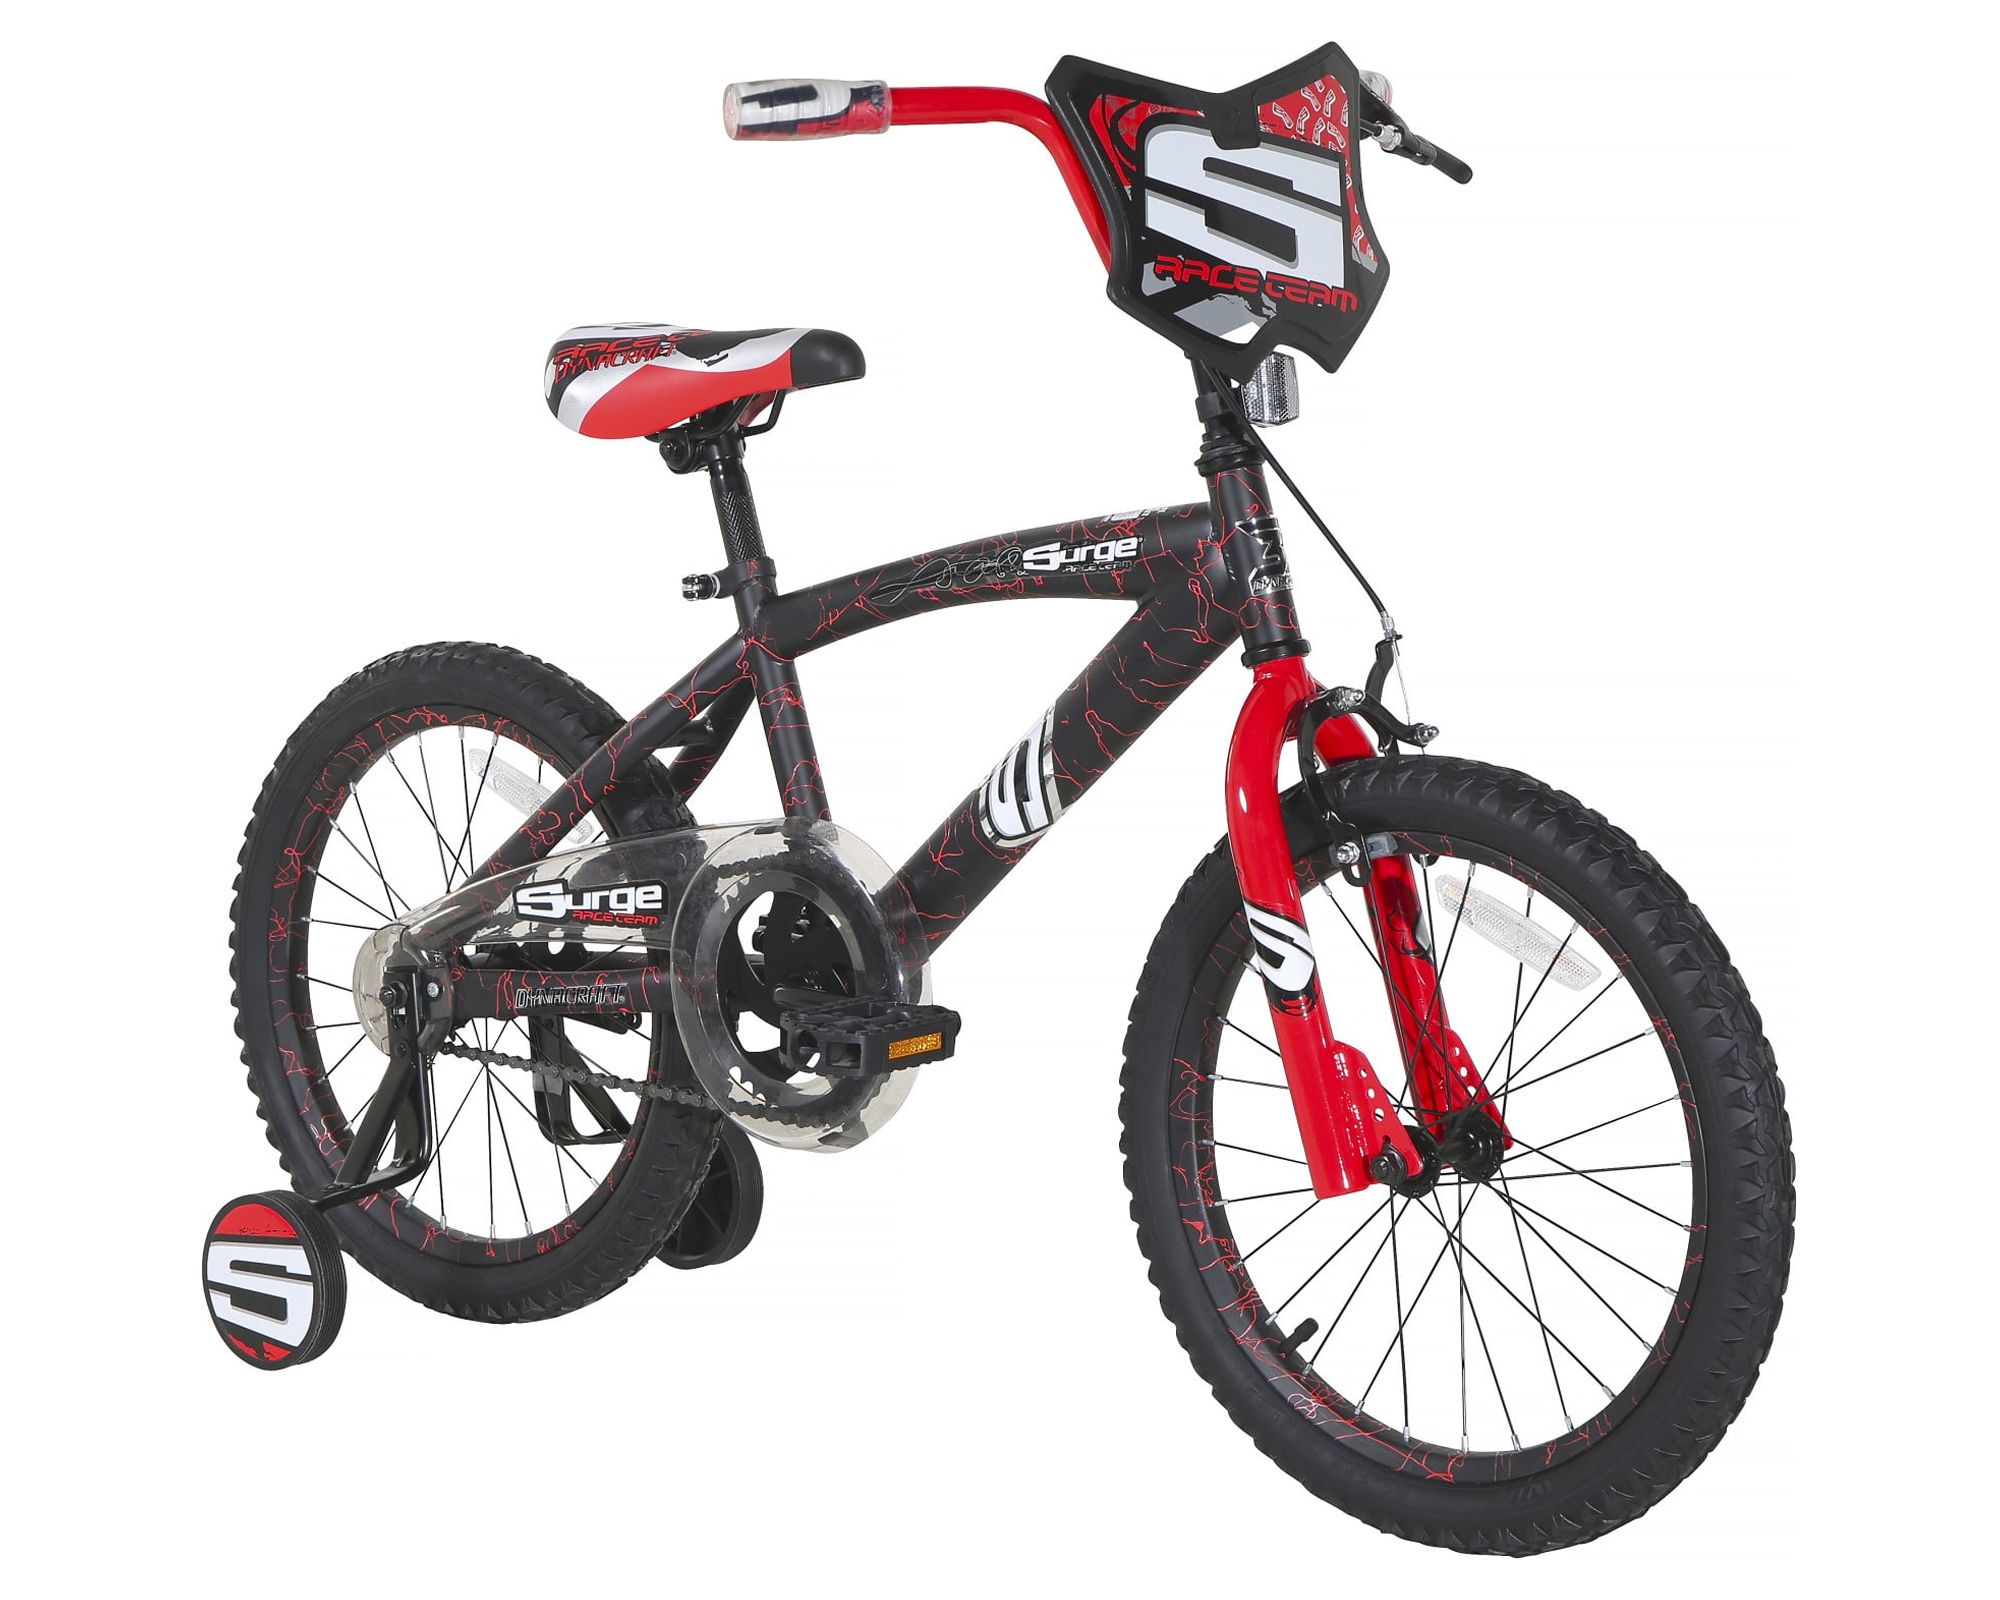 Dynacraft Surge 18-inch Boys BMX Bike for Age 6-9 Years - image 1 of 11